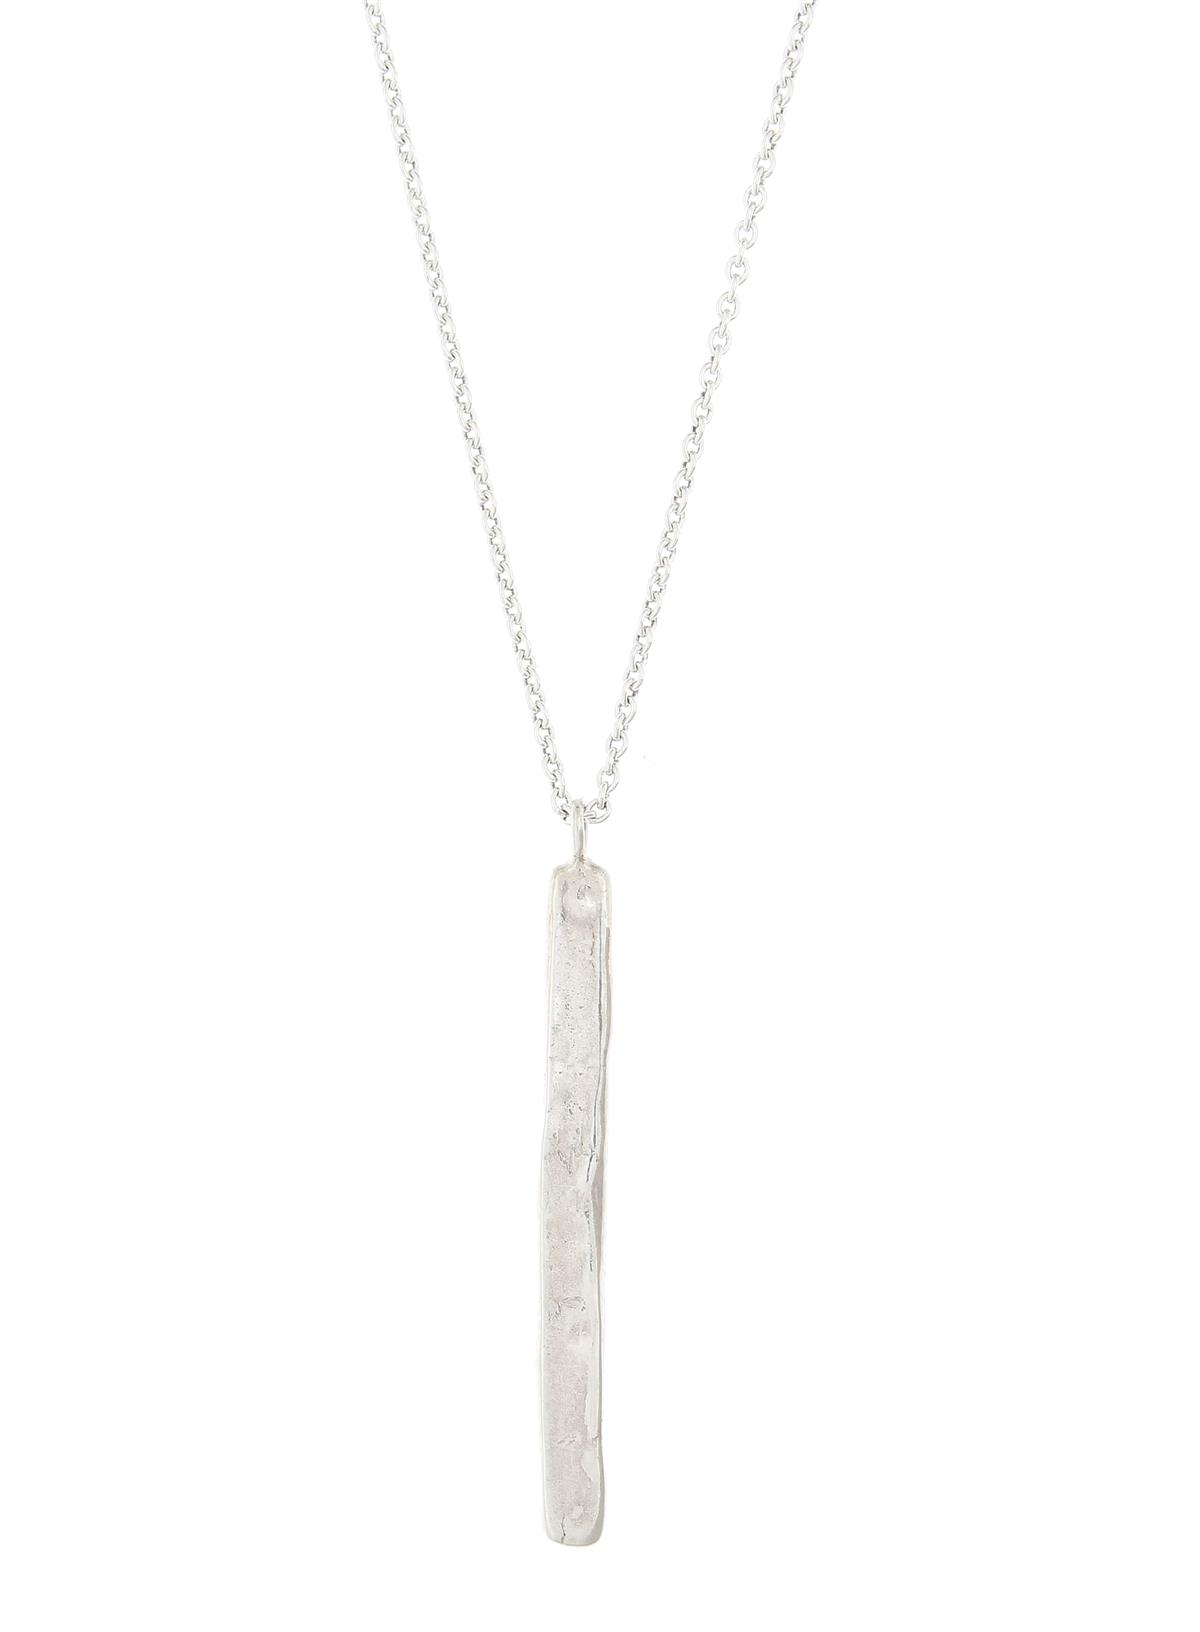 Katie g. Jewellery_Tag Pendant - Long thin - silver polished